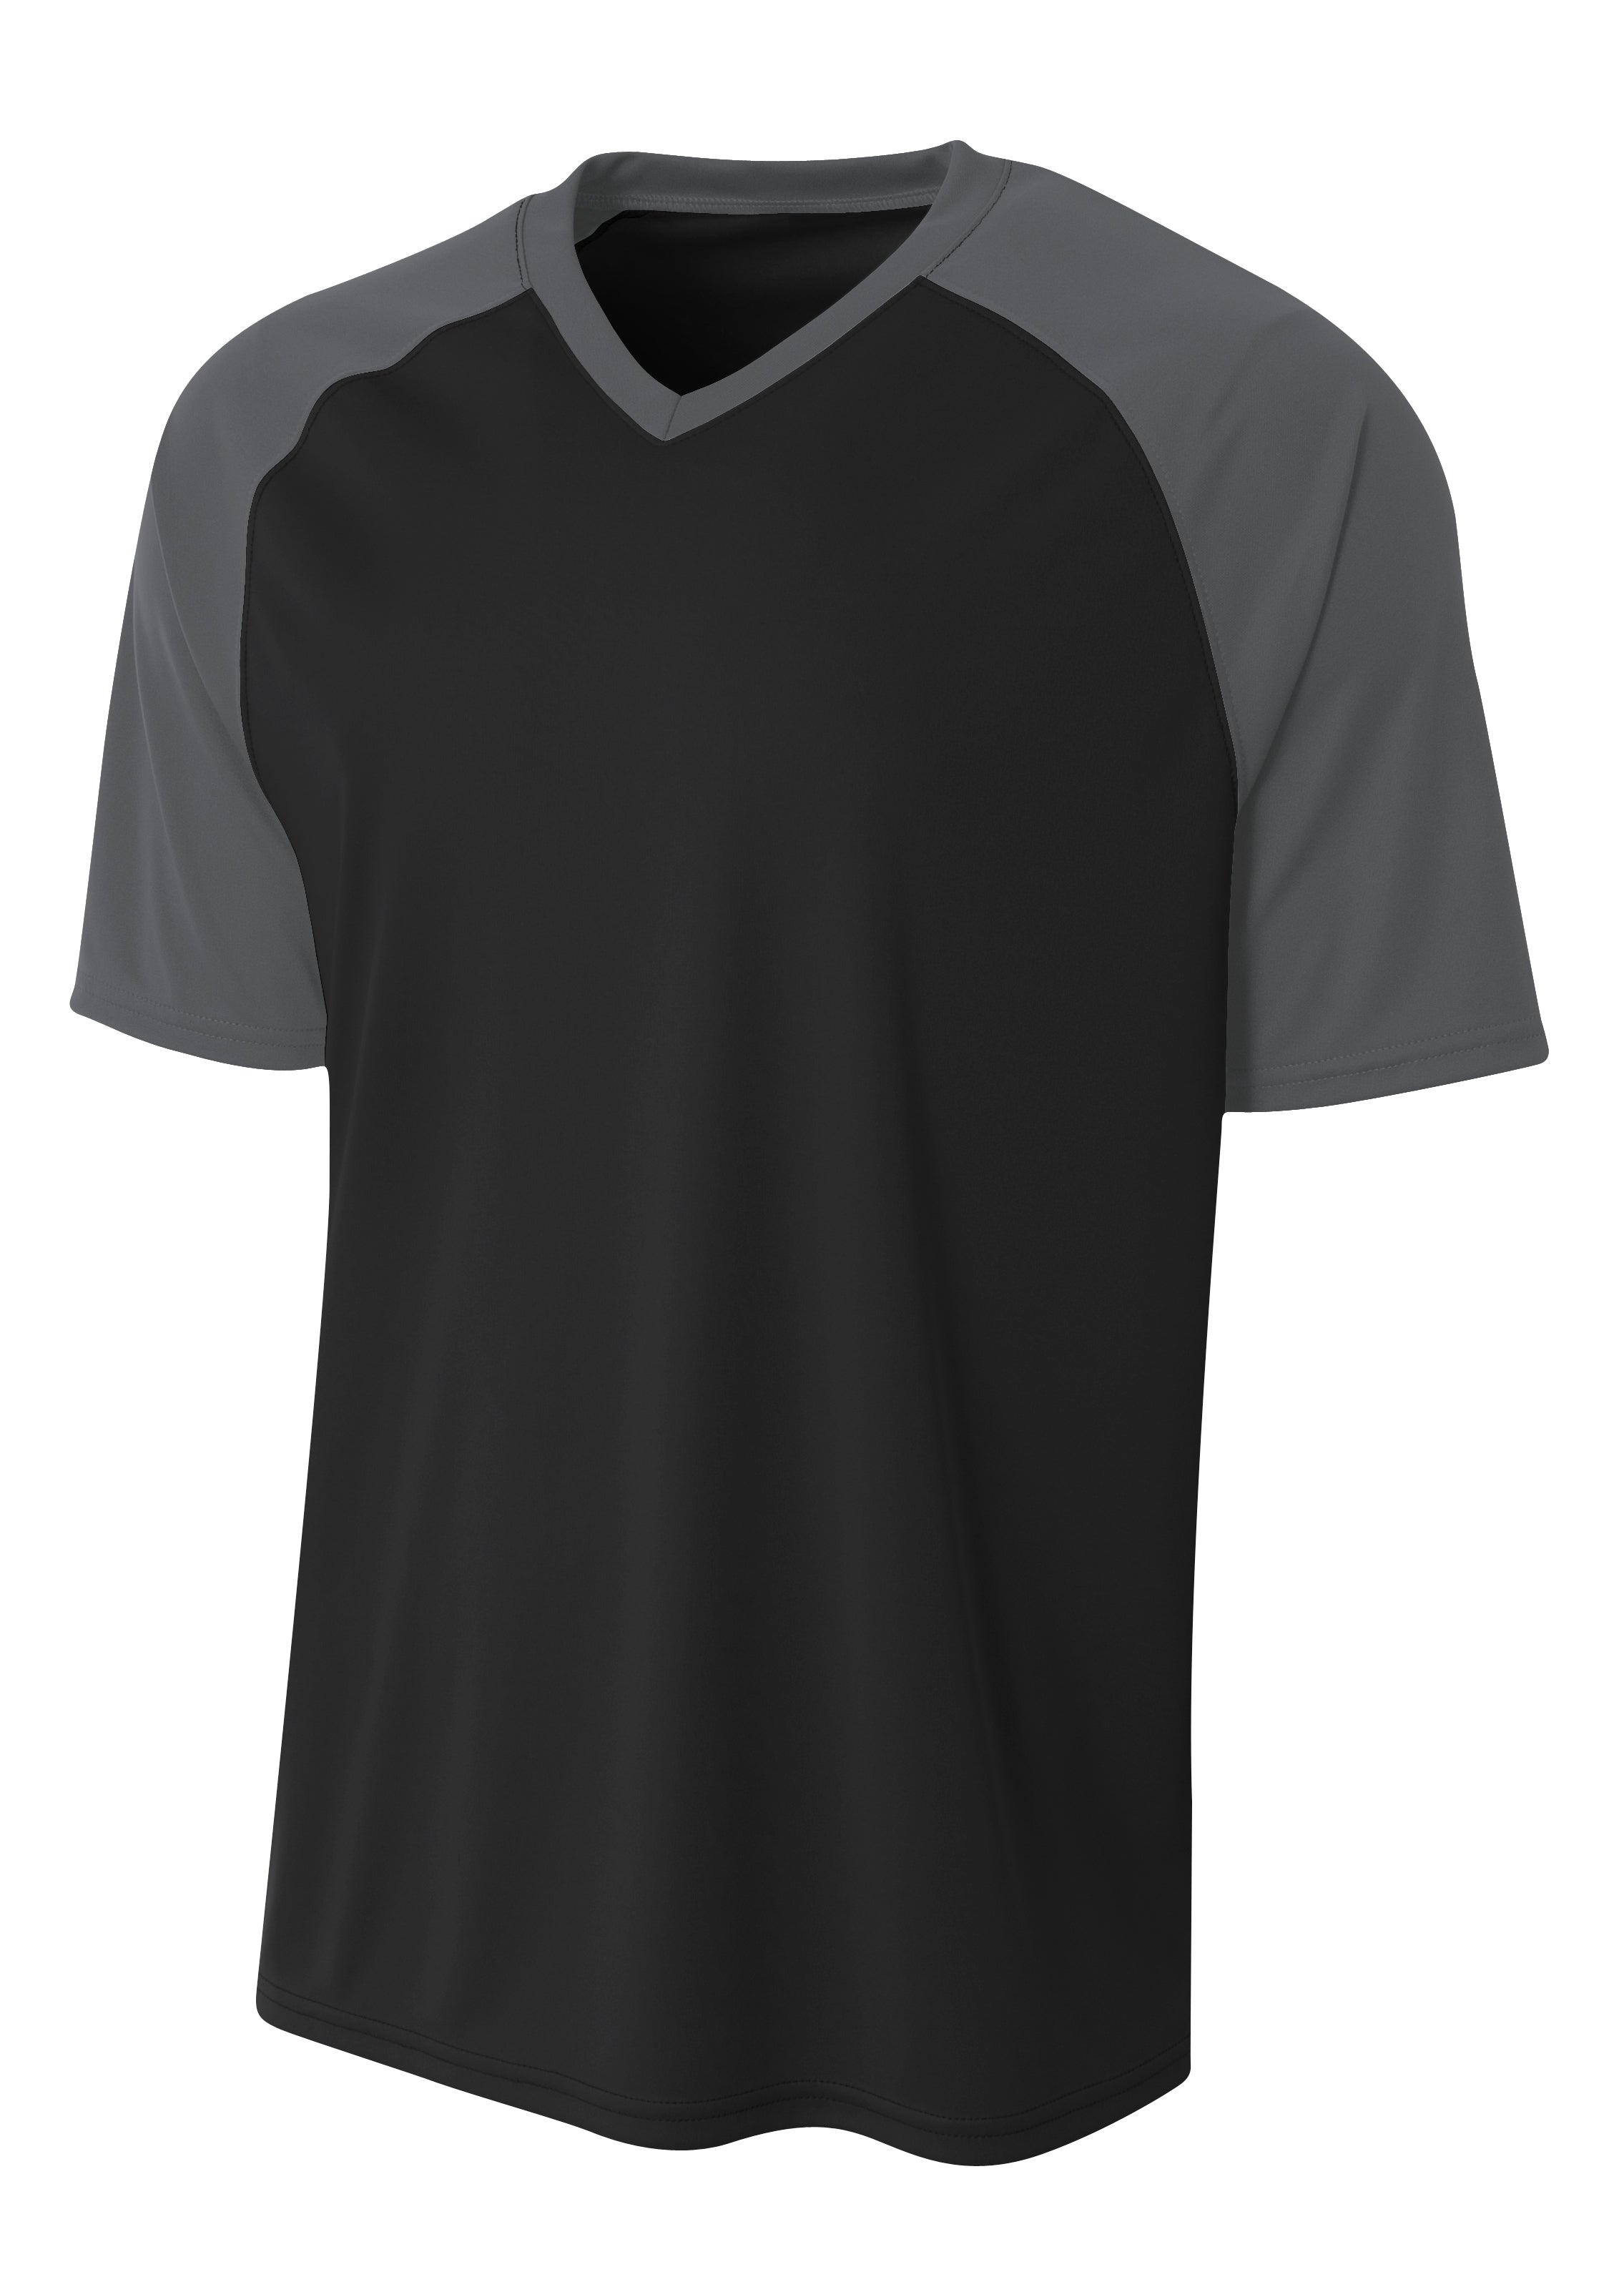 A4 Strike Youth Soccer Jersey - Youth Sports Products